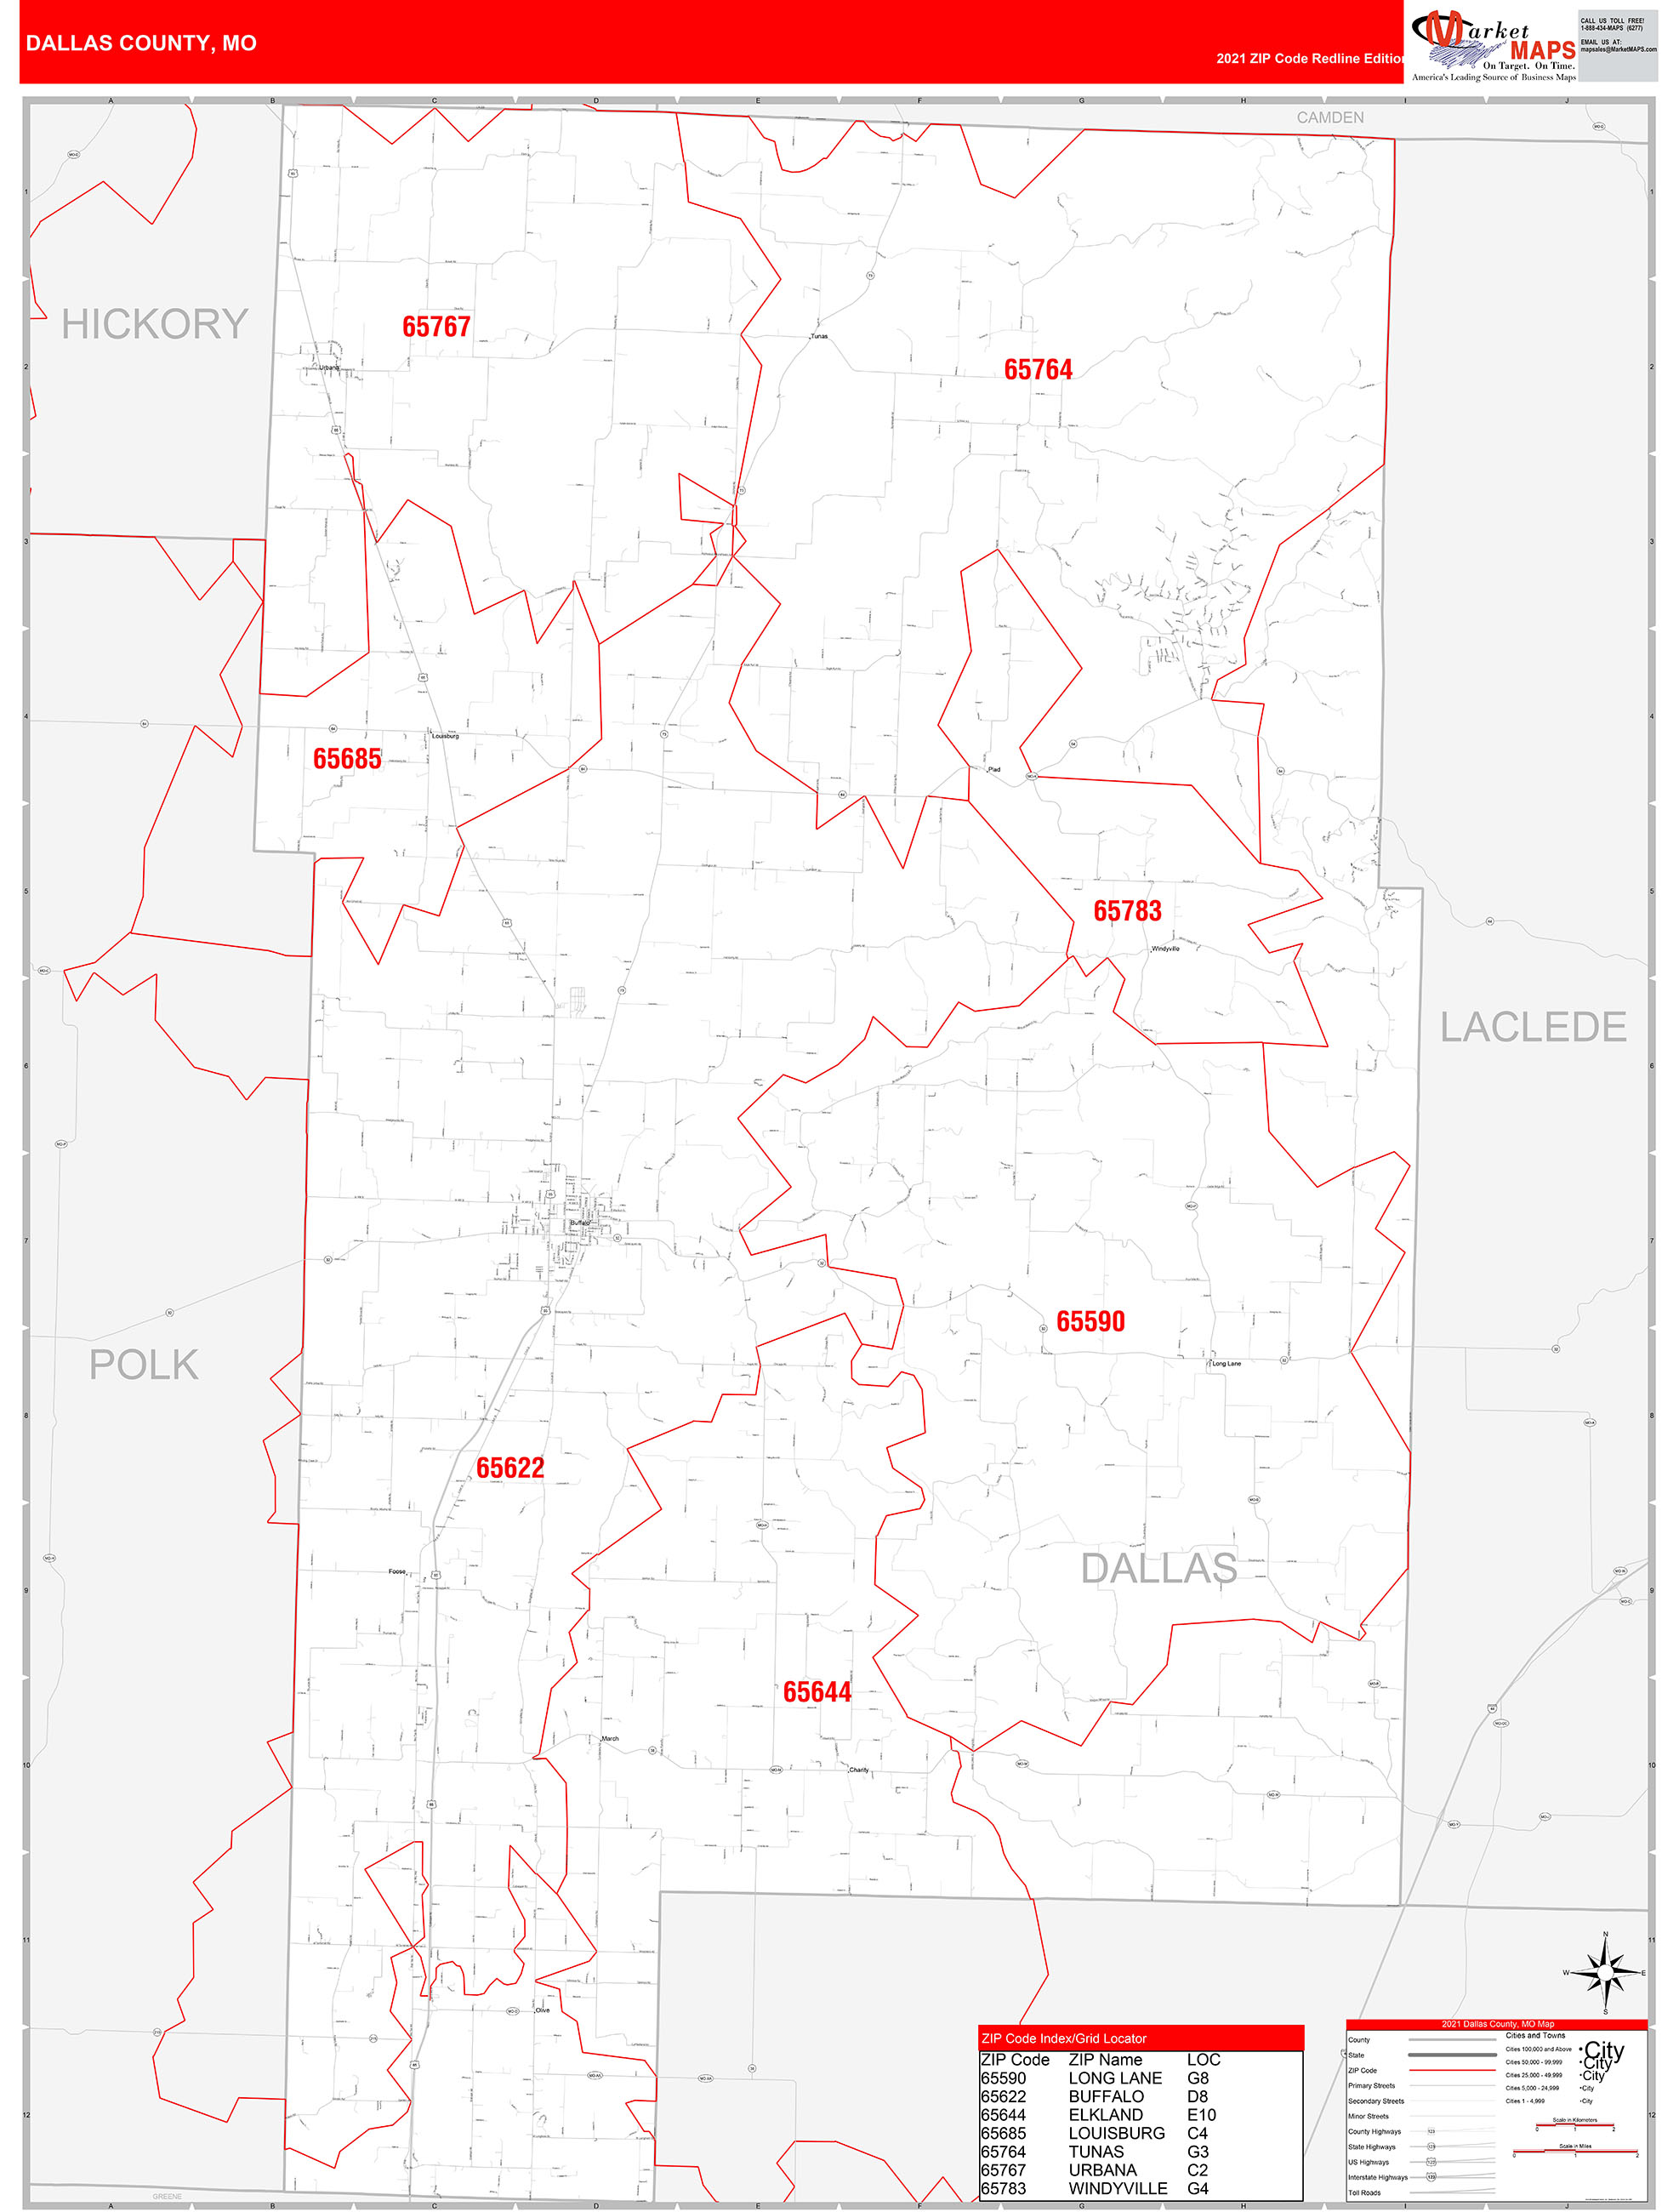 Dallas County, MO Zip Code Wall Map Red Line Style by MarketMAPS - MapSales